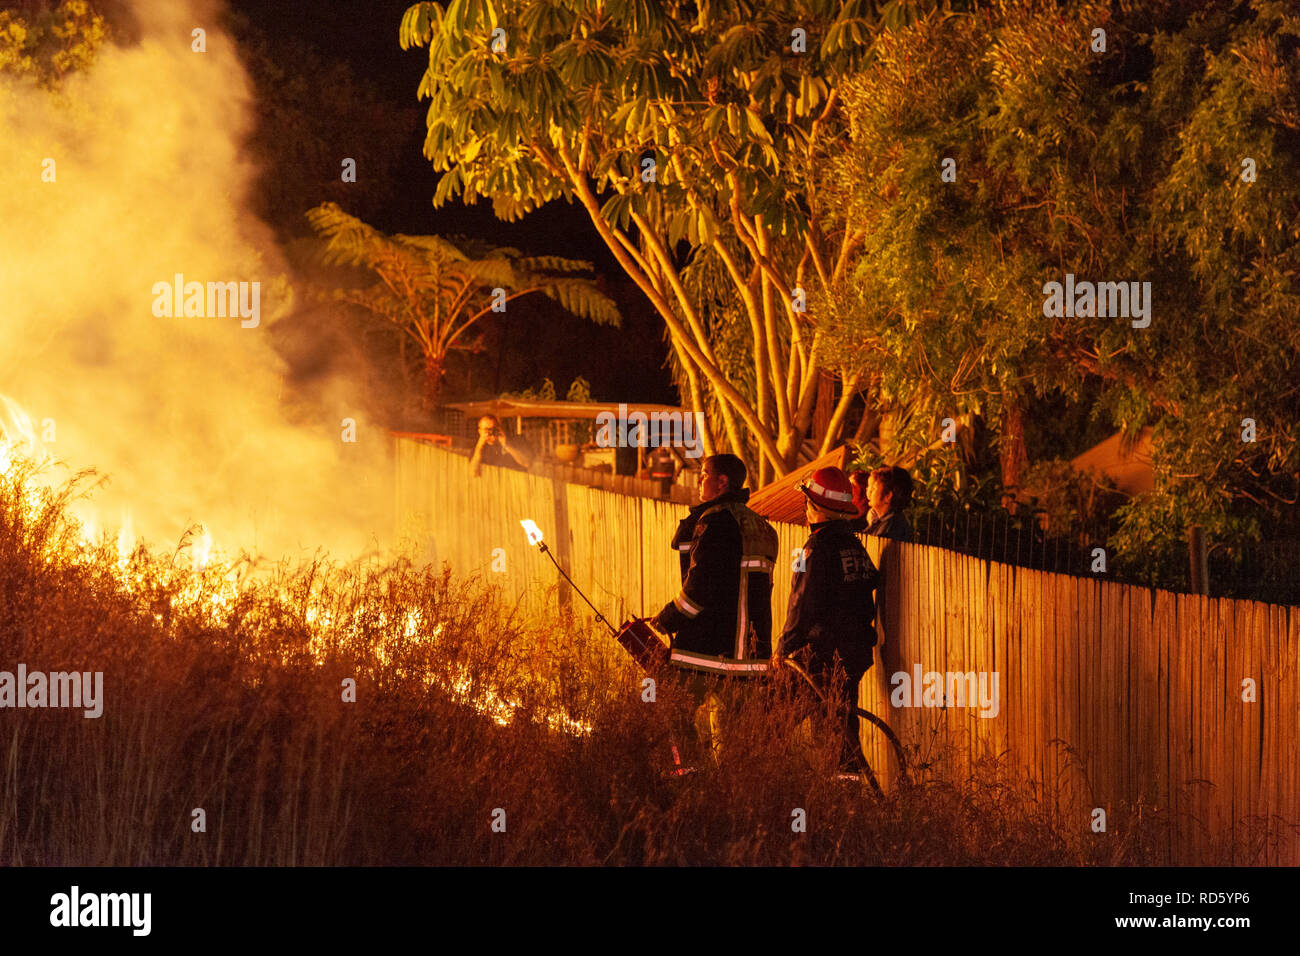 Teralba, NSW/Australia - October 24, 2012: Firemen or firefighters backburning and extinguishing a wildfire grass and bushfire to protect residents of Stock Photo